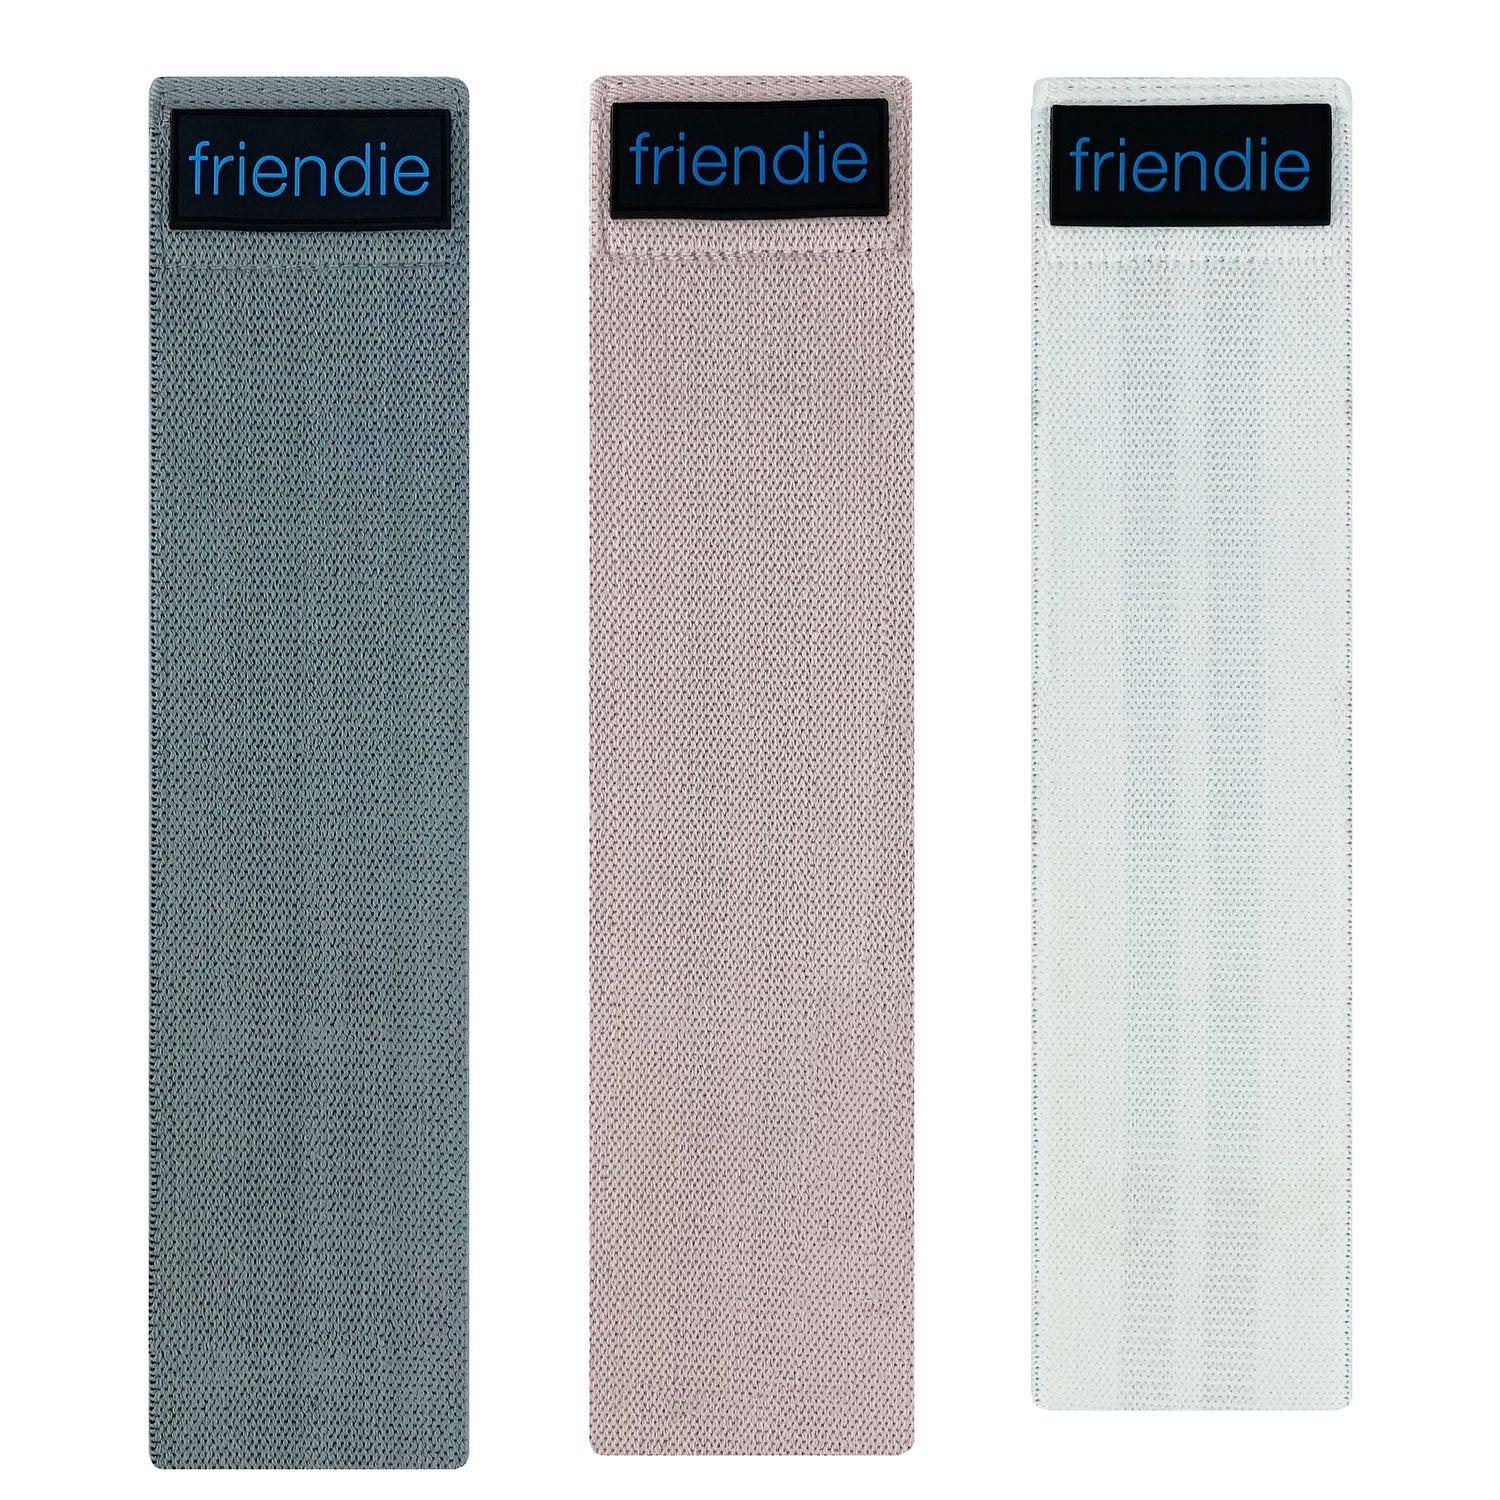 Friendie Fit Booty Bands in Blush Tones